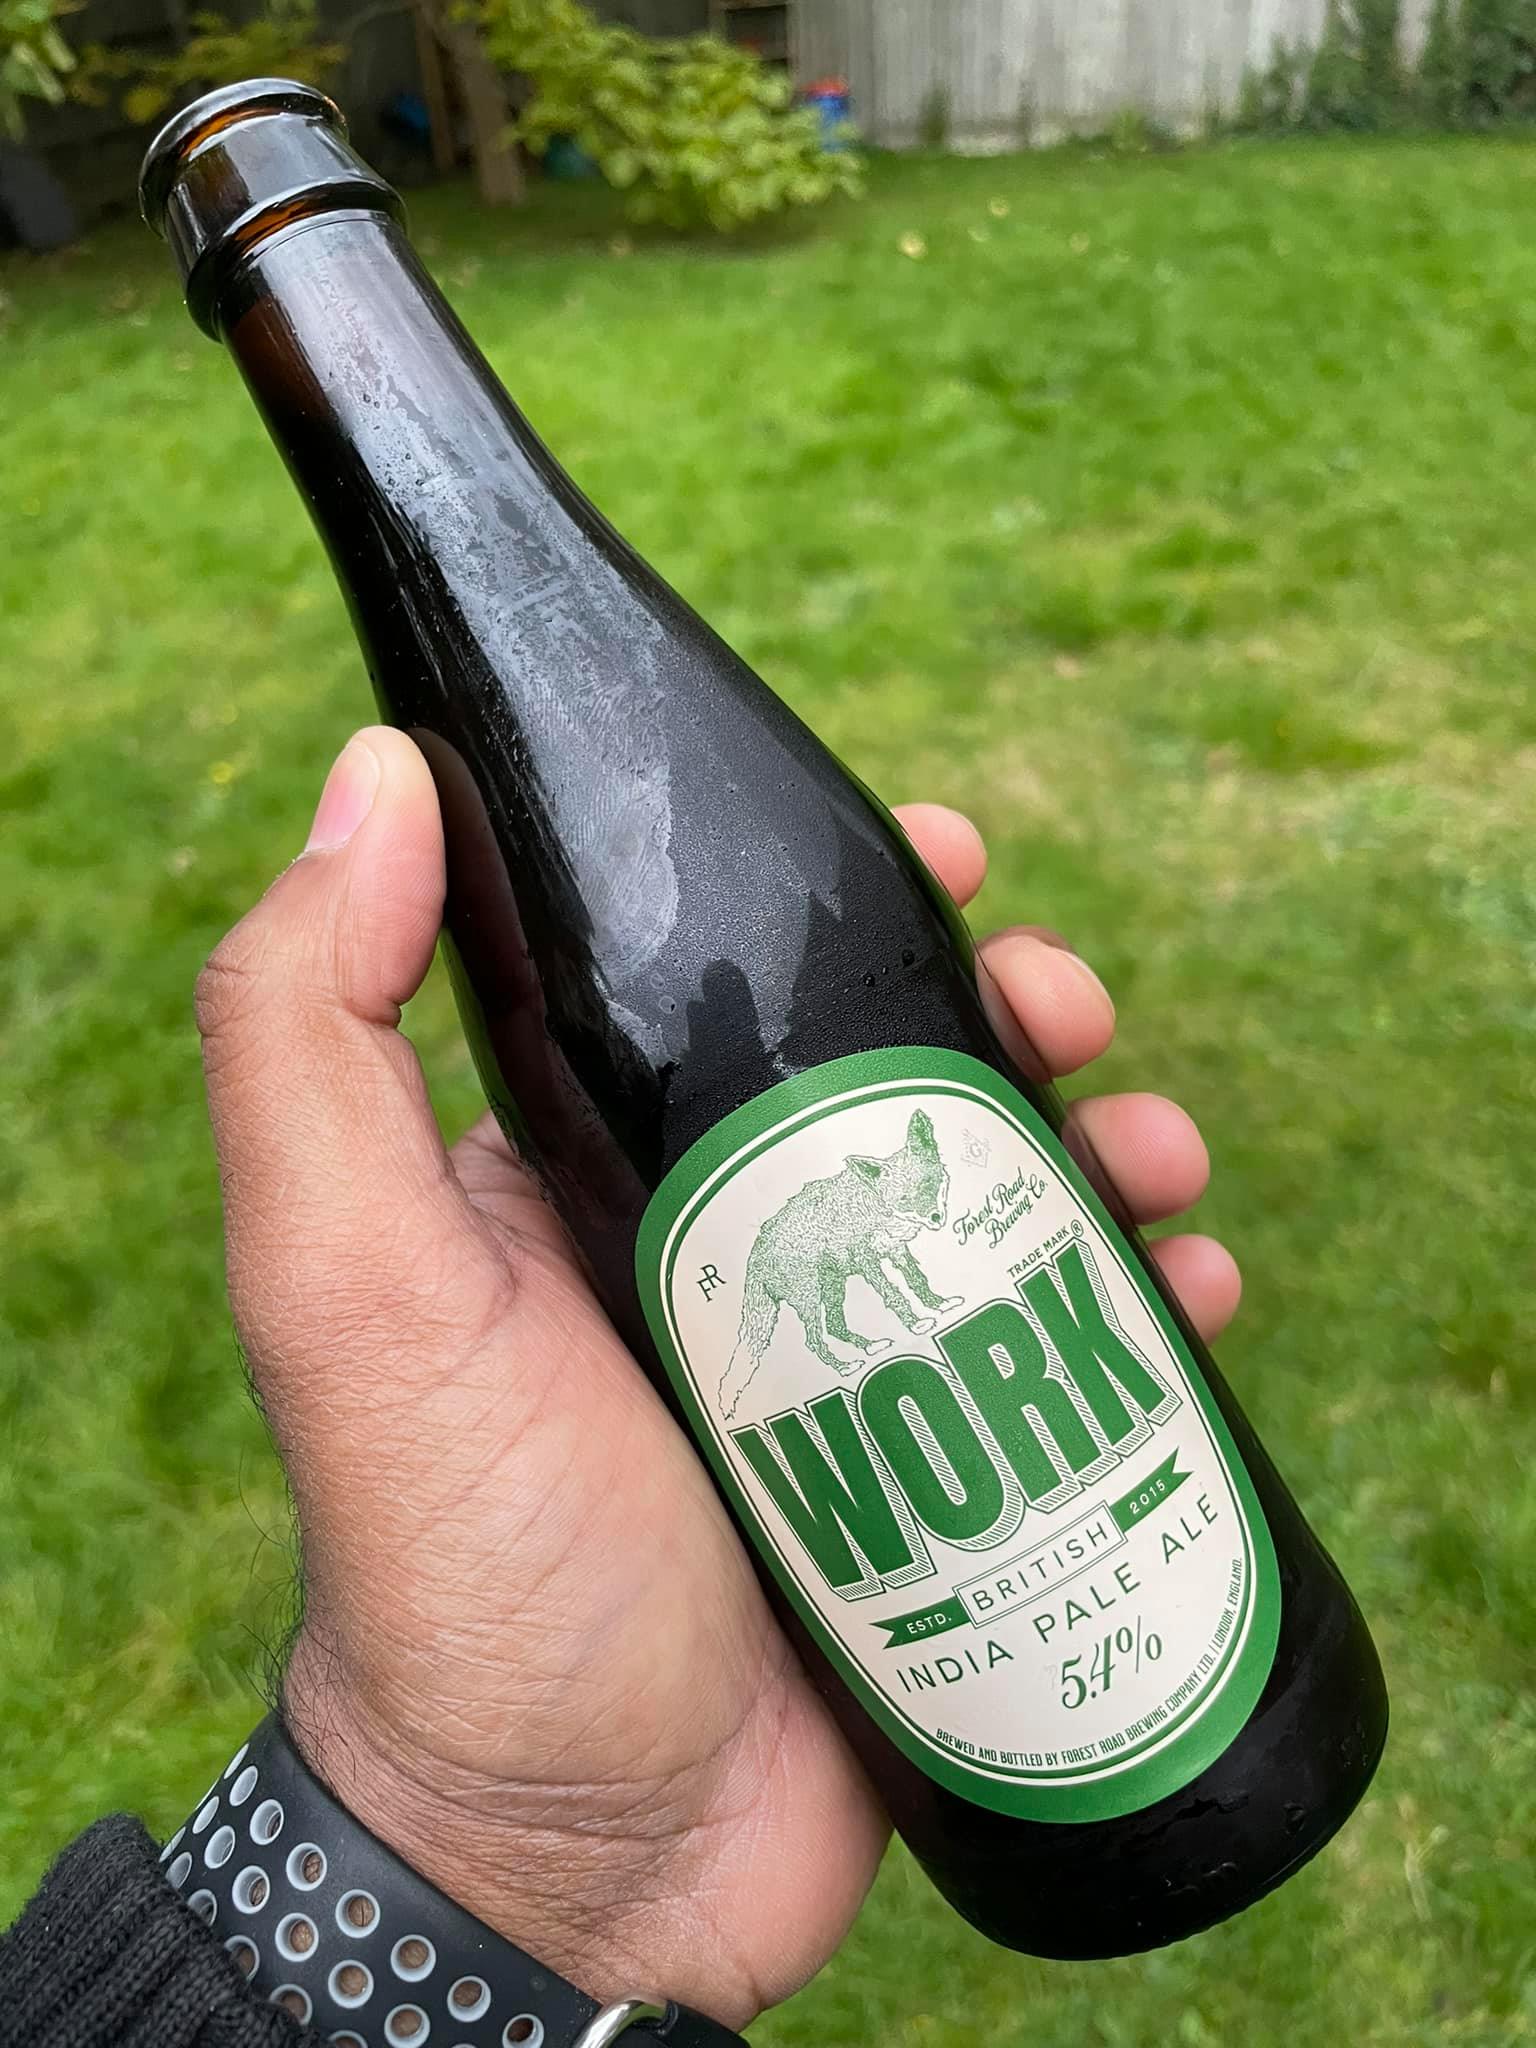 Work India Pale Ale
